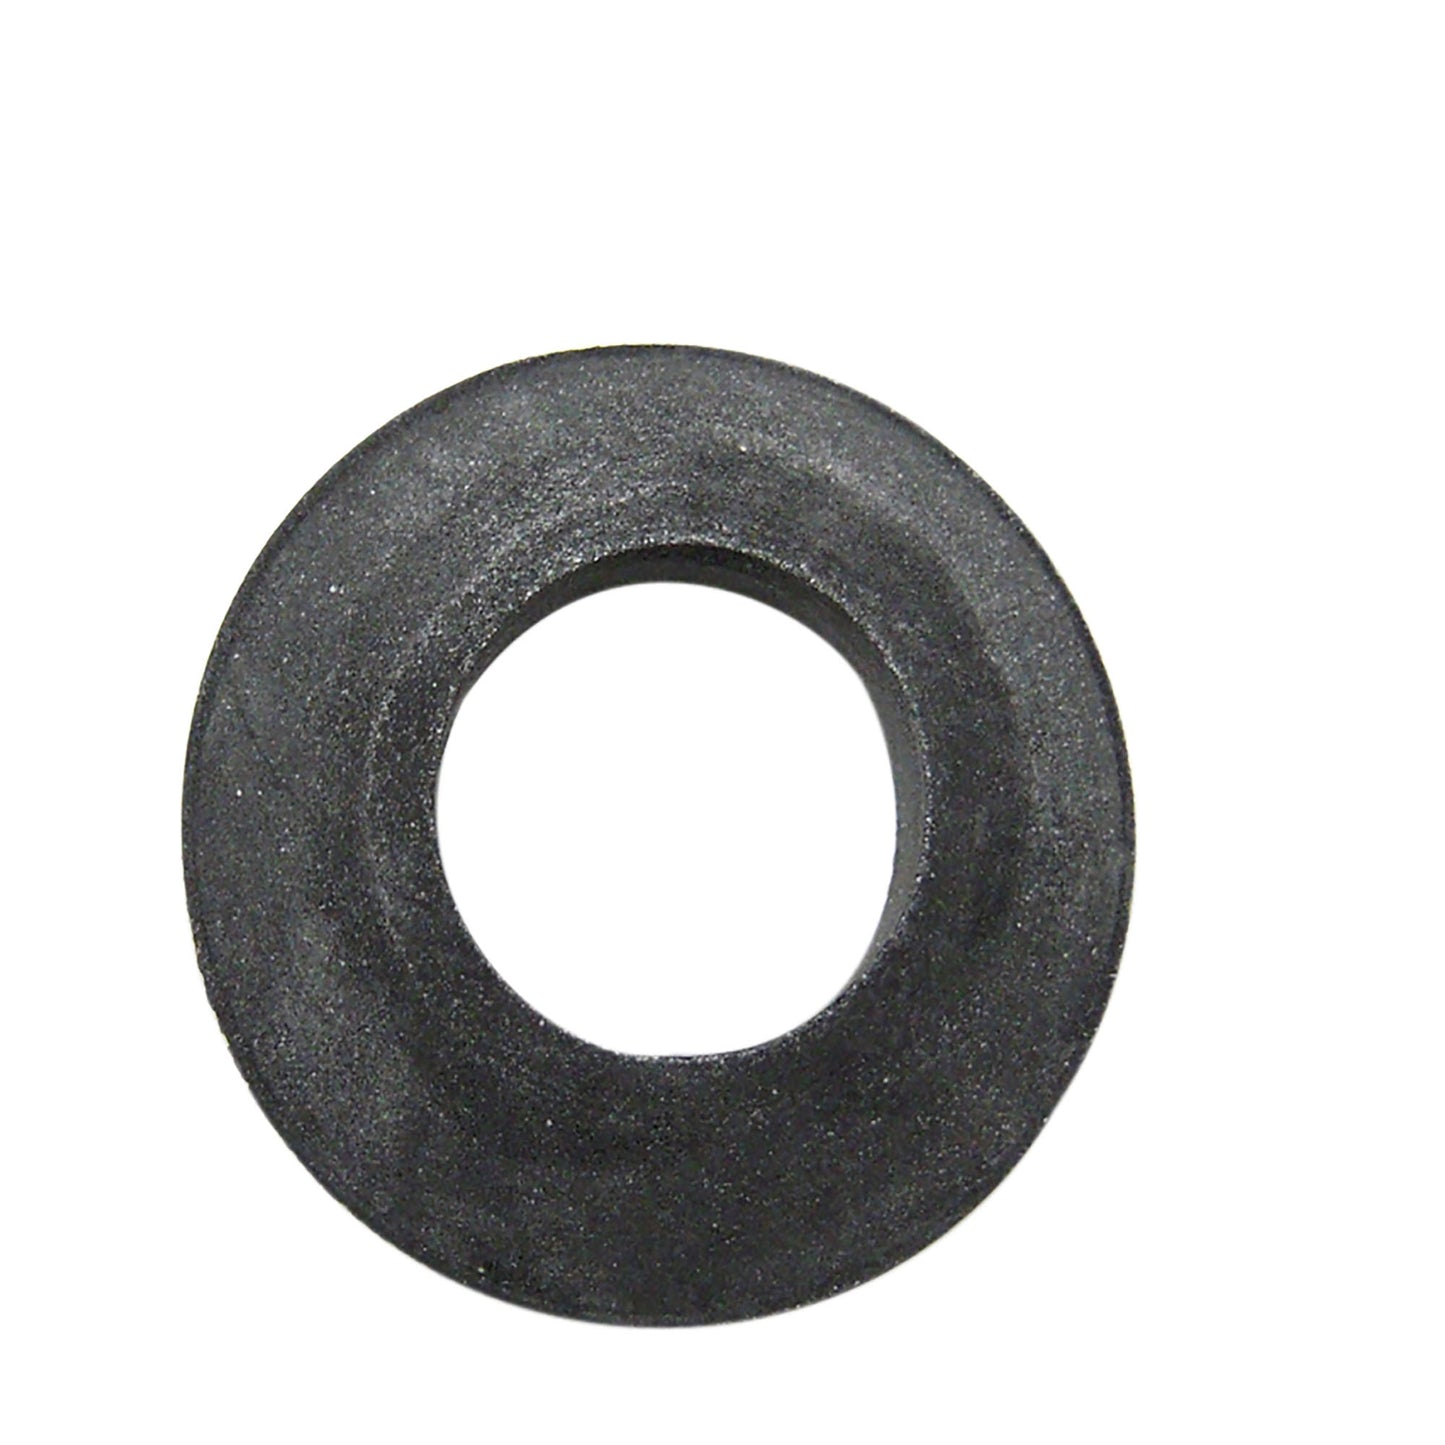 047218-0070A - Tank-to-Bowl Gasket for Flushmate Pressure Assist Toilets